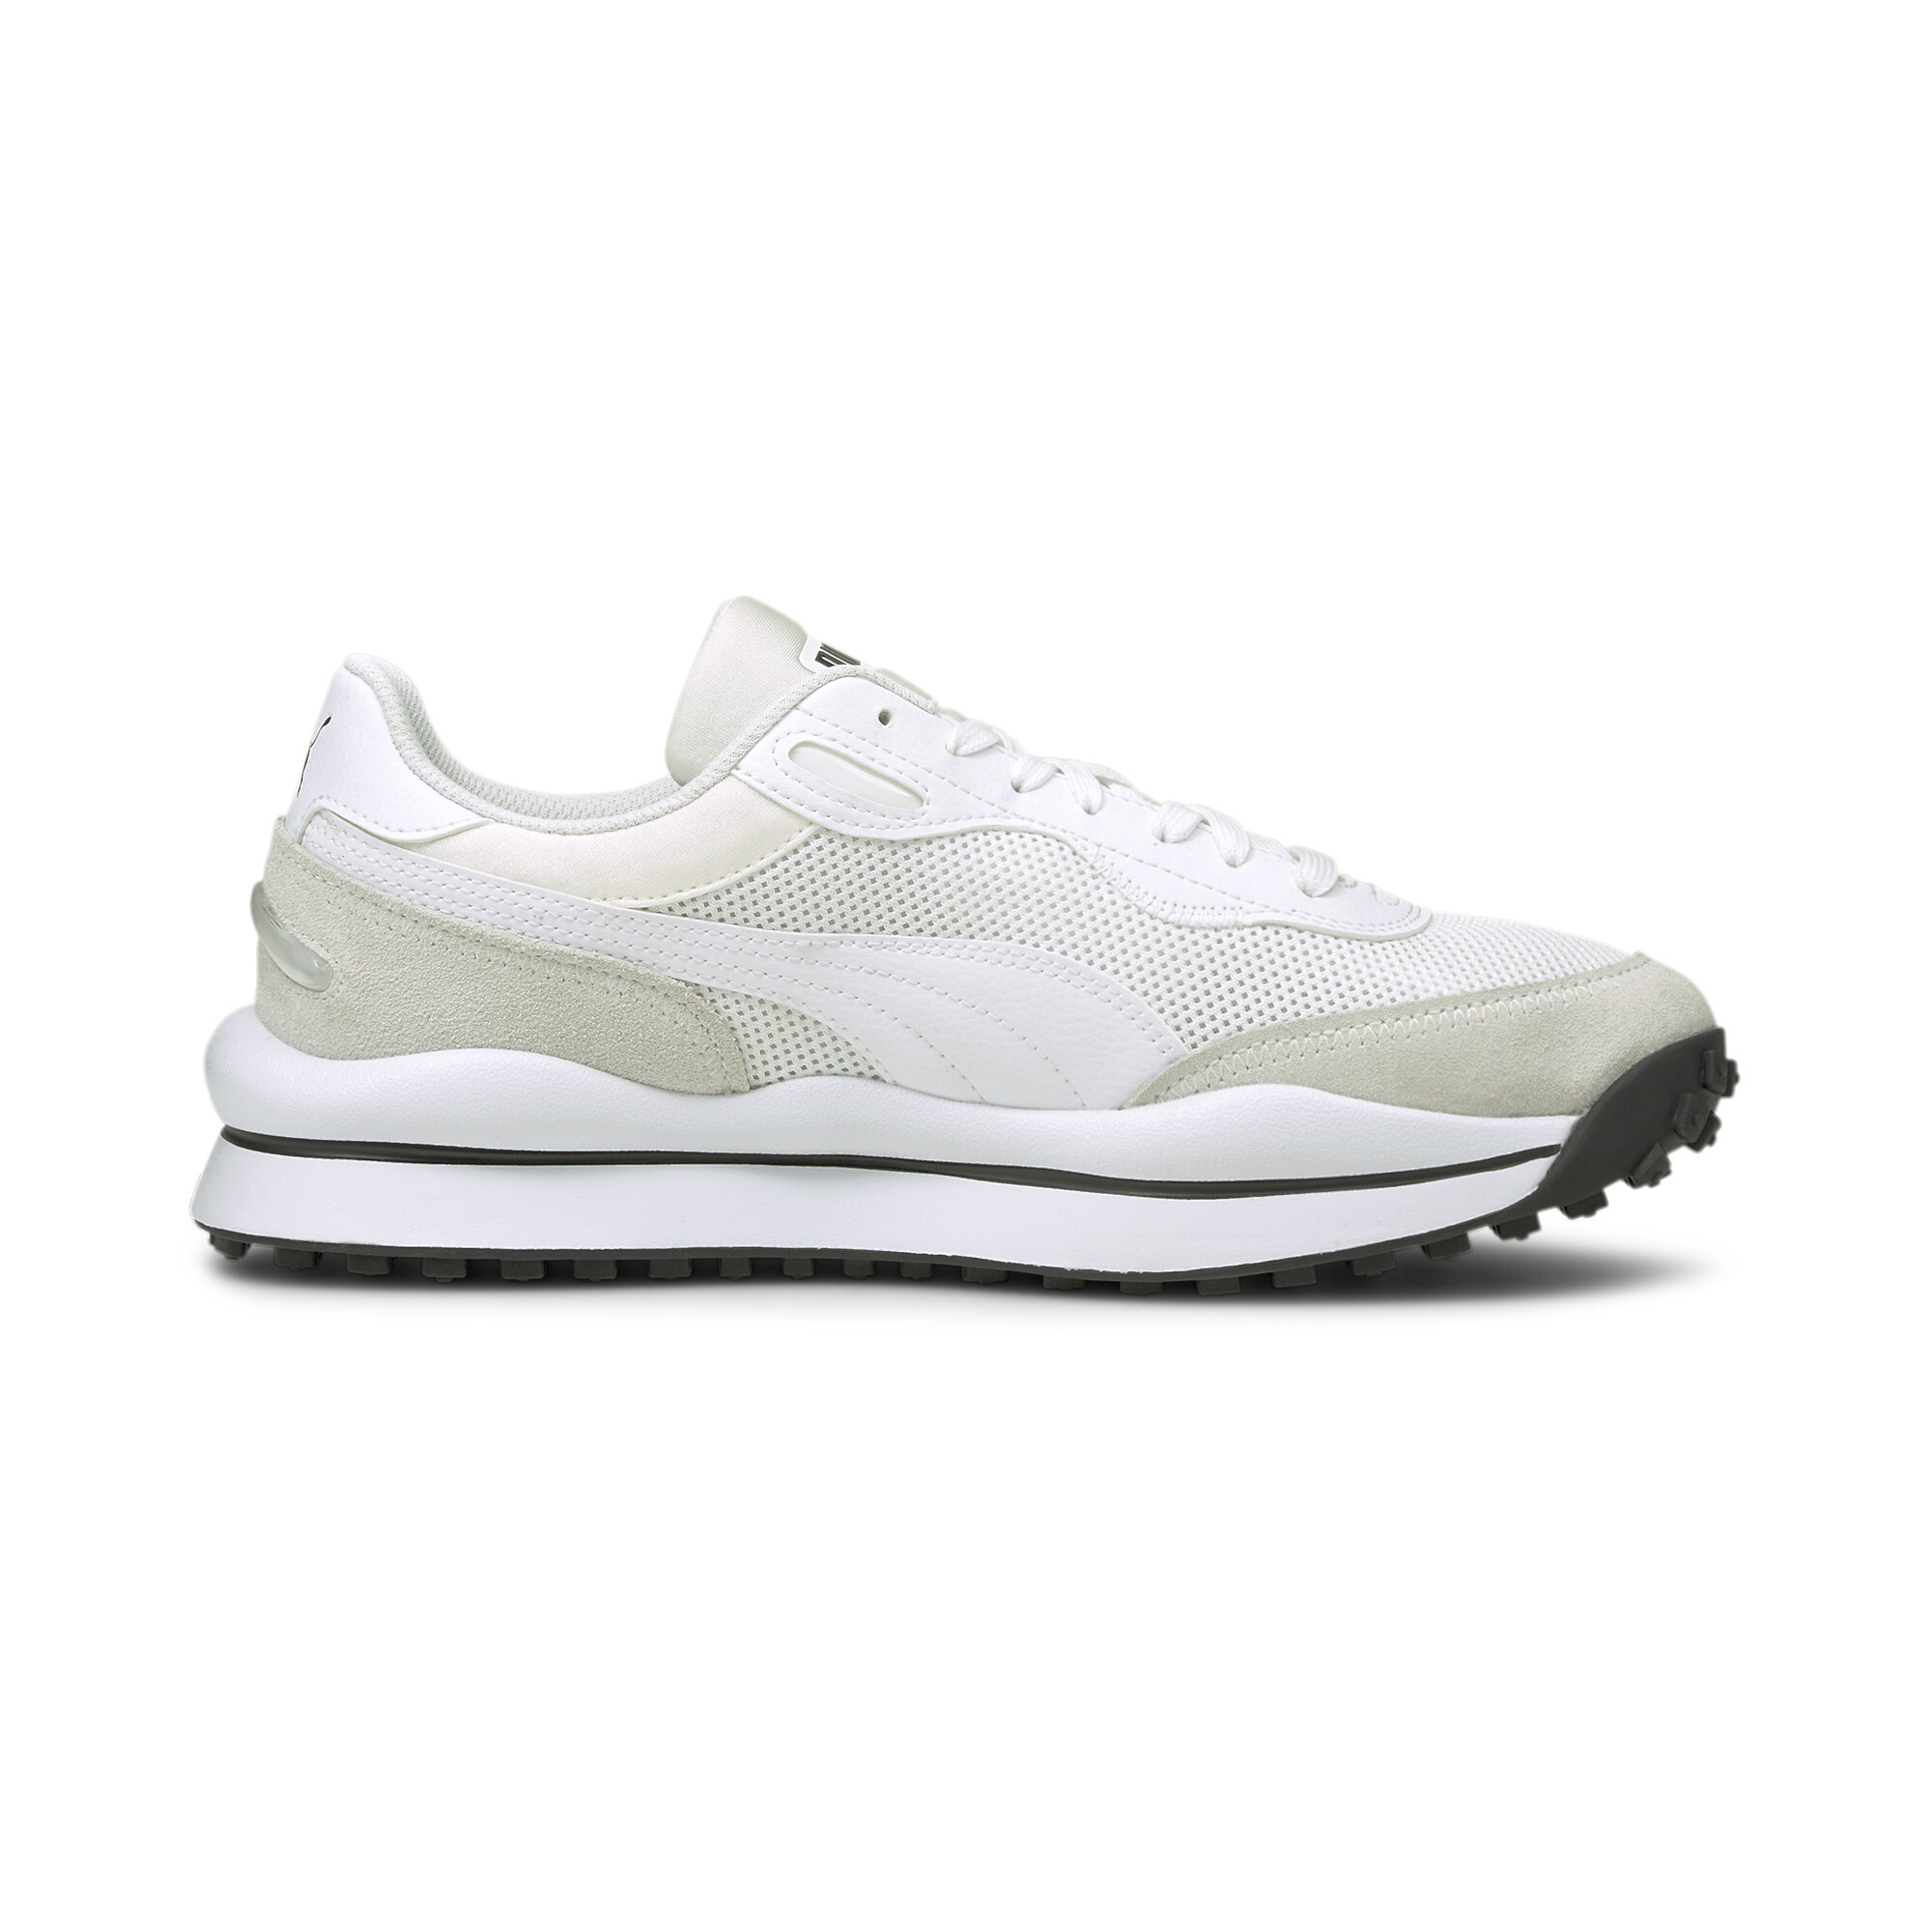 Men's PUMA Style Rider Clean Trainers Shoes In White, Size EU 35.5